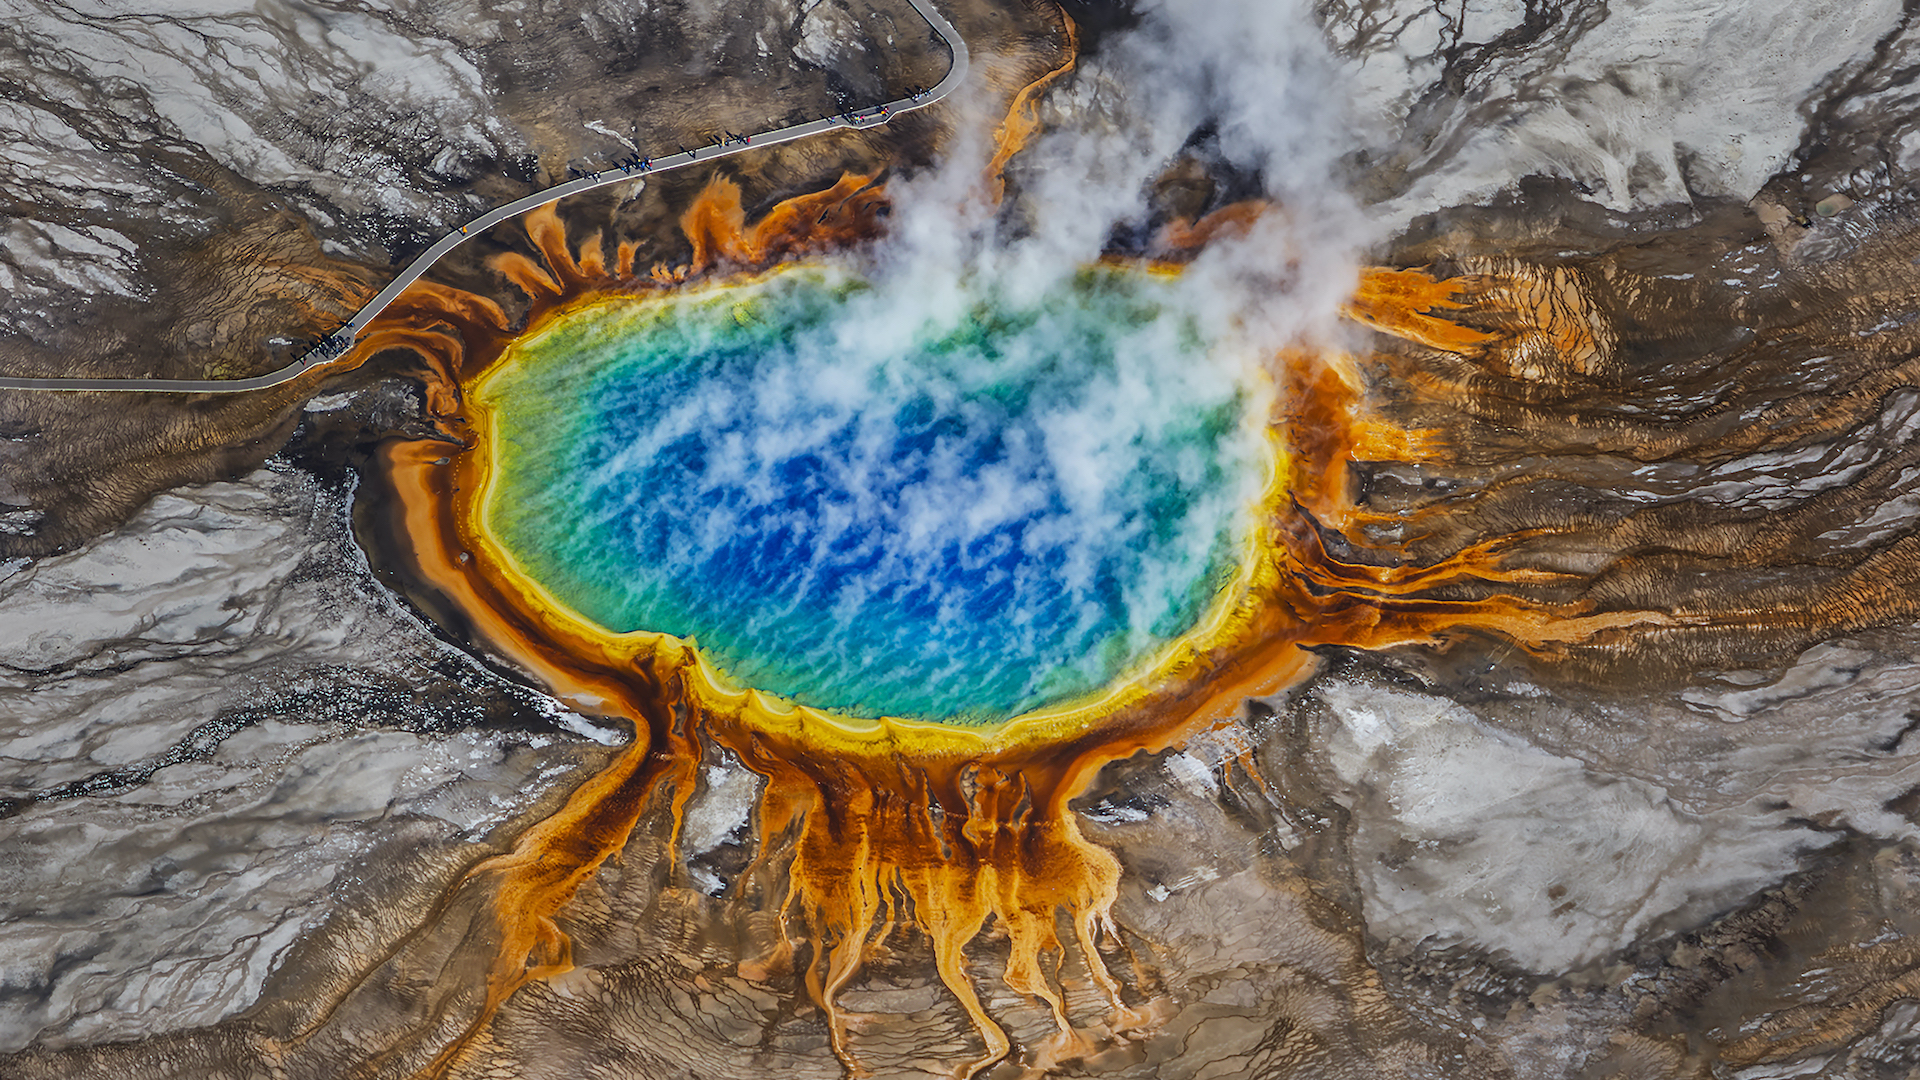 The geothermal sites are the most dangerous features of Yellowstone, and should only be viewed from designated areas 